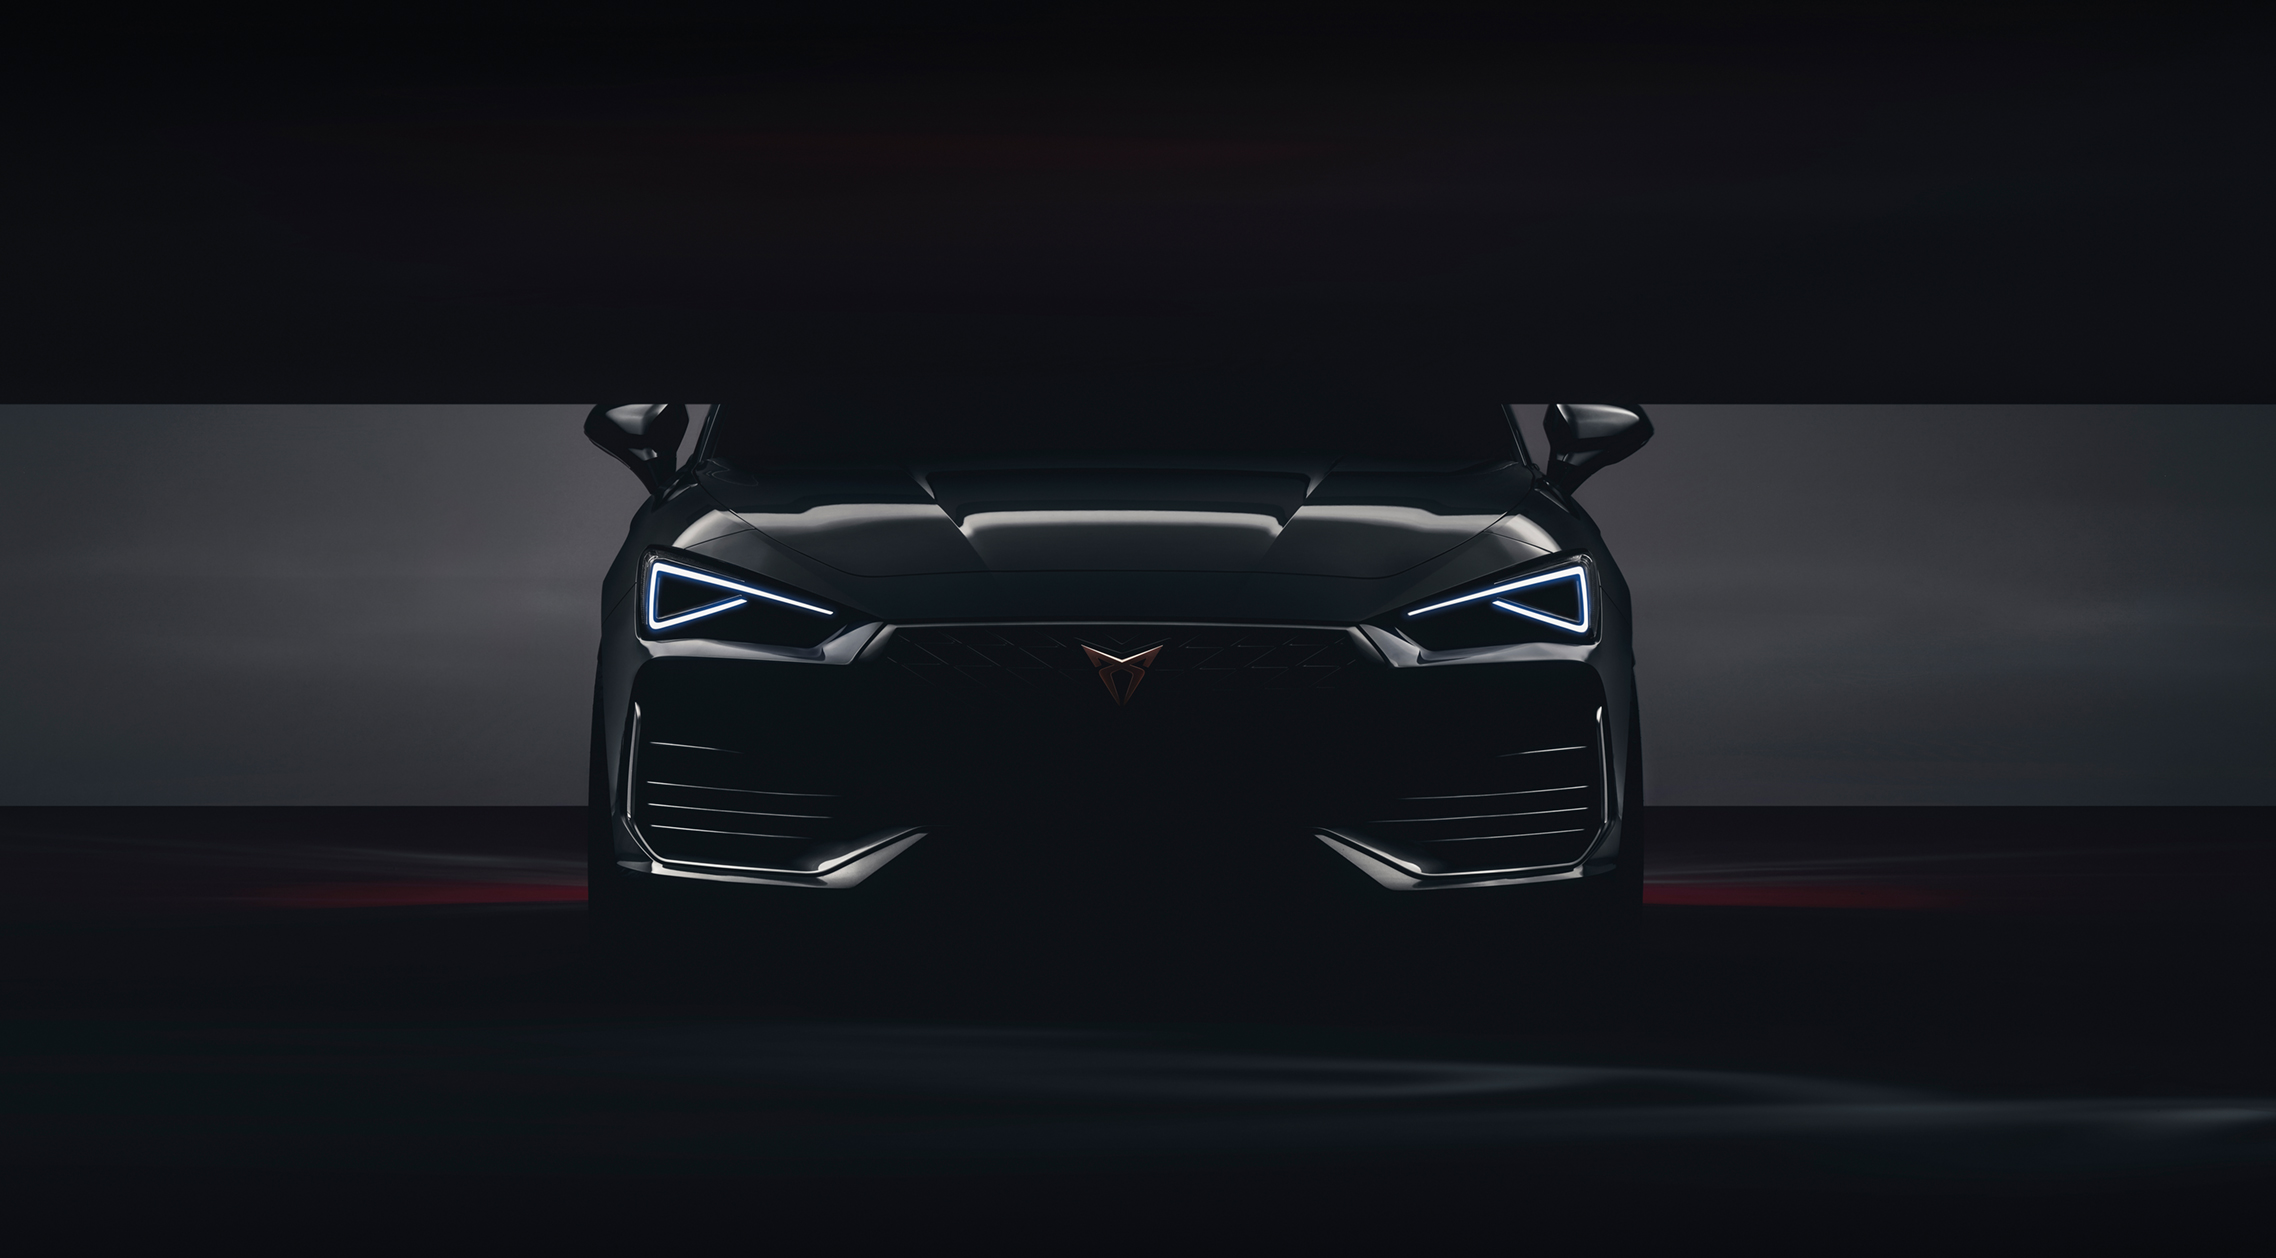 The CUPRA Leon family will be unveiled in its road and racing versions 